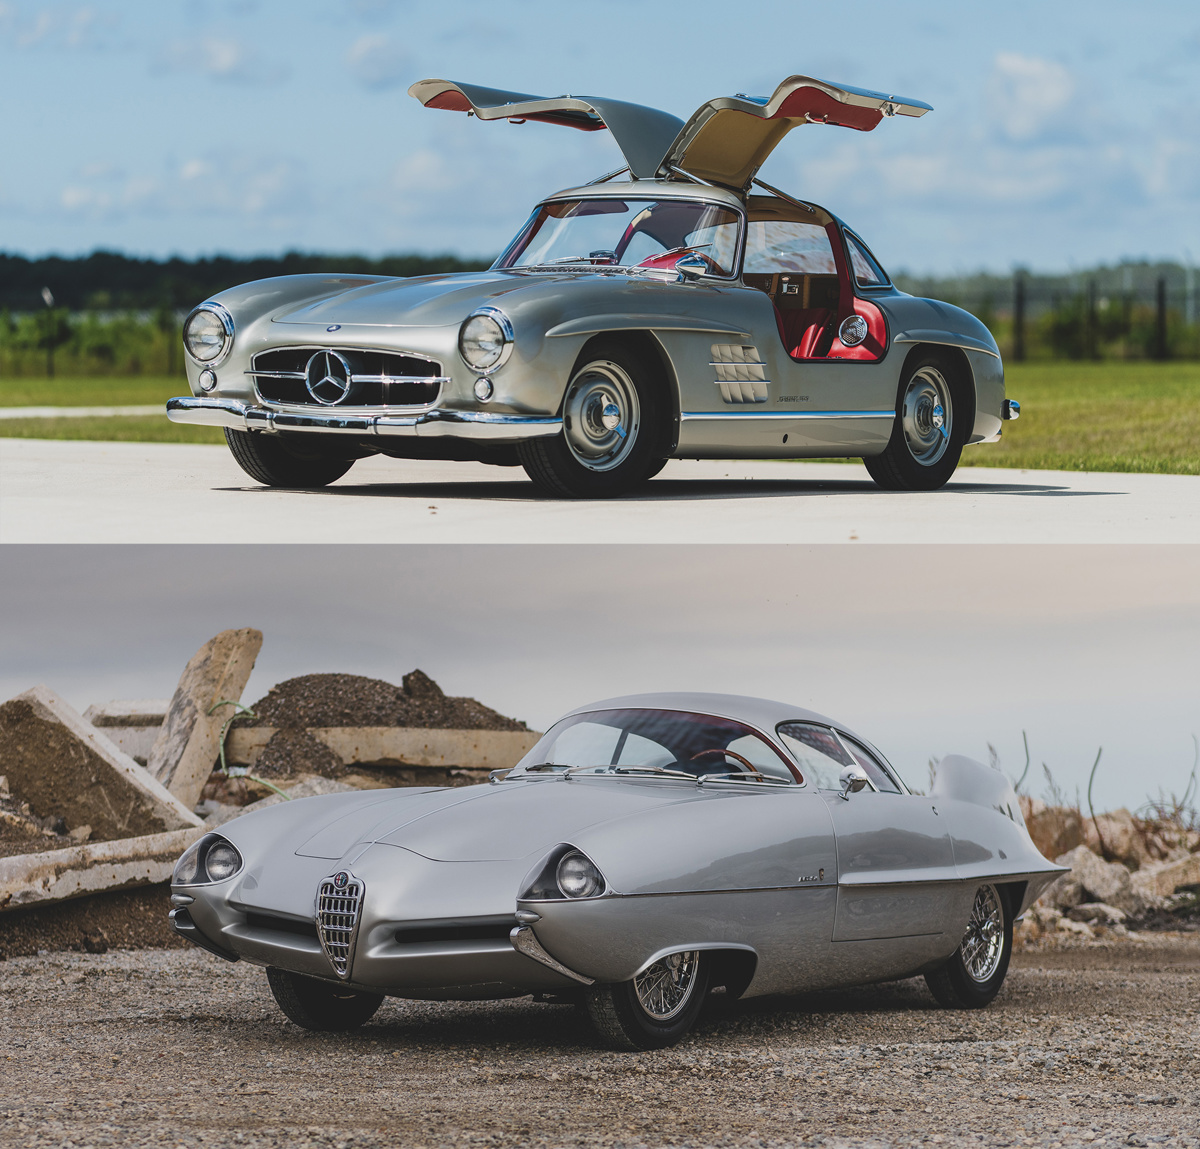 Alfa Romeo B.A.T. 5 7 and 9d Concept Cars offered at Sotheby’s Contemporary Art Evening Auction 2020